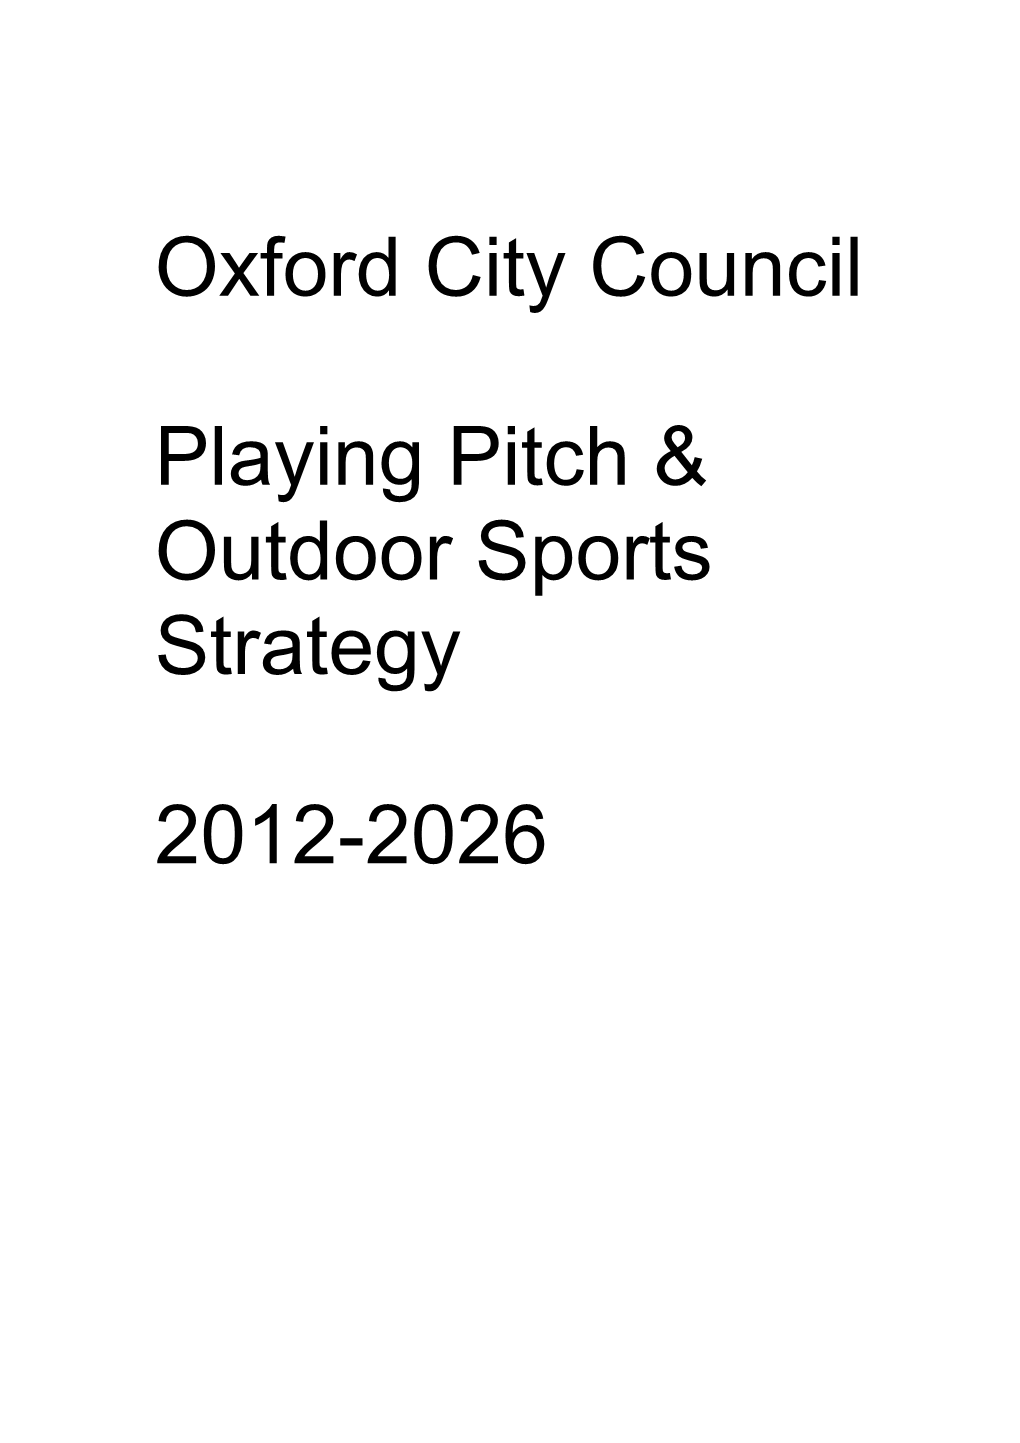 Oxford City Council Playing Pitch & Outdoor Sports Strategy 2012-2026